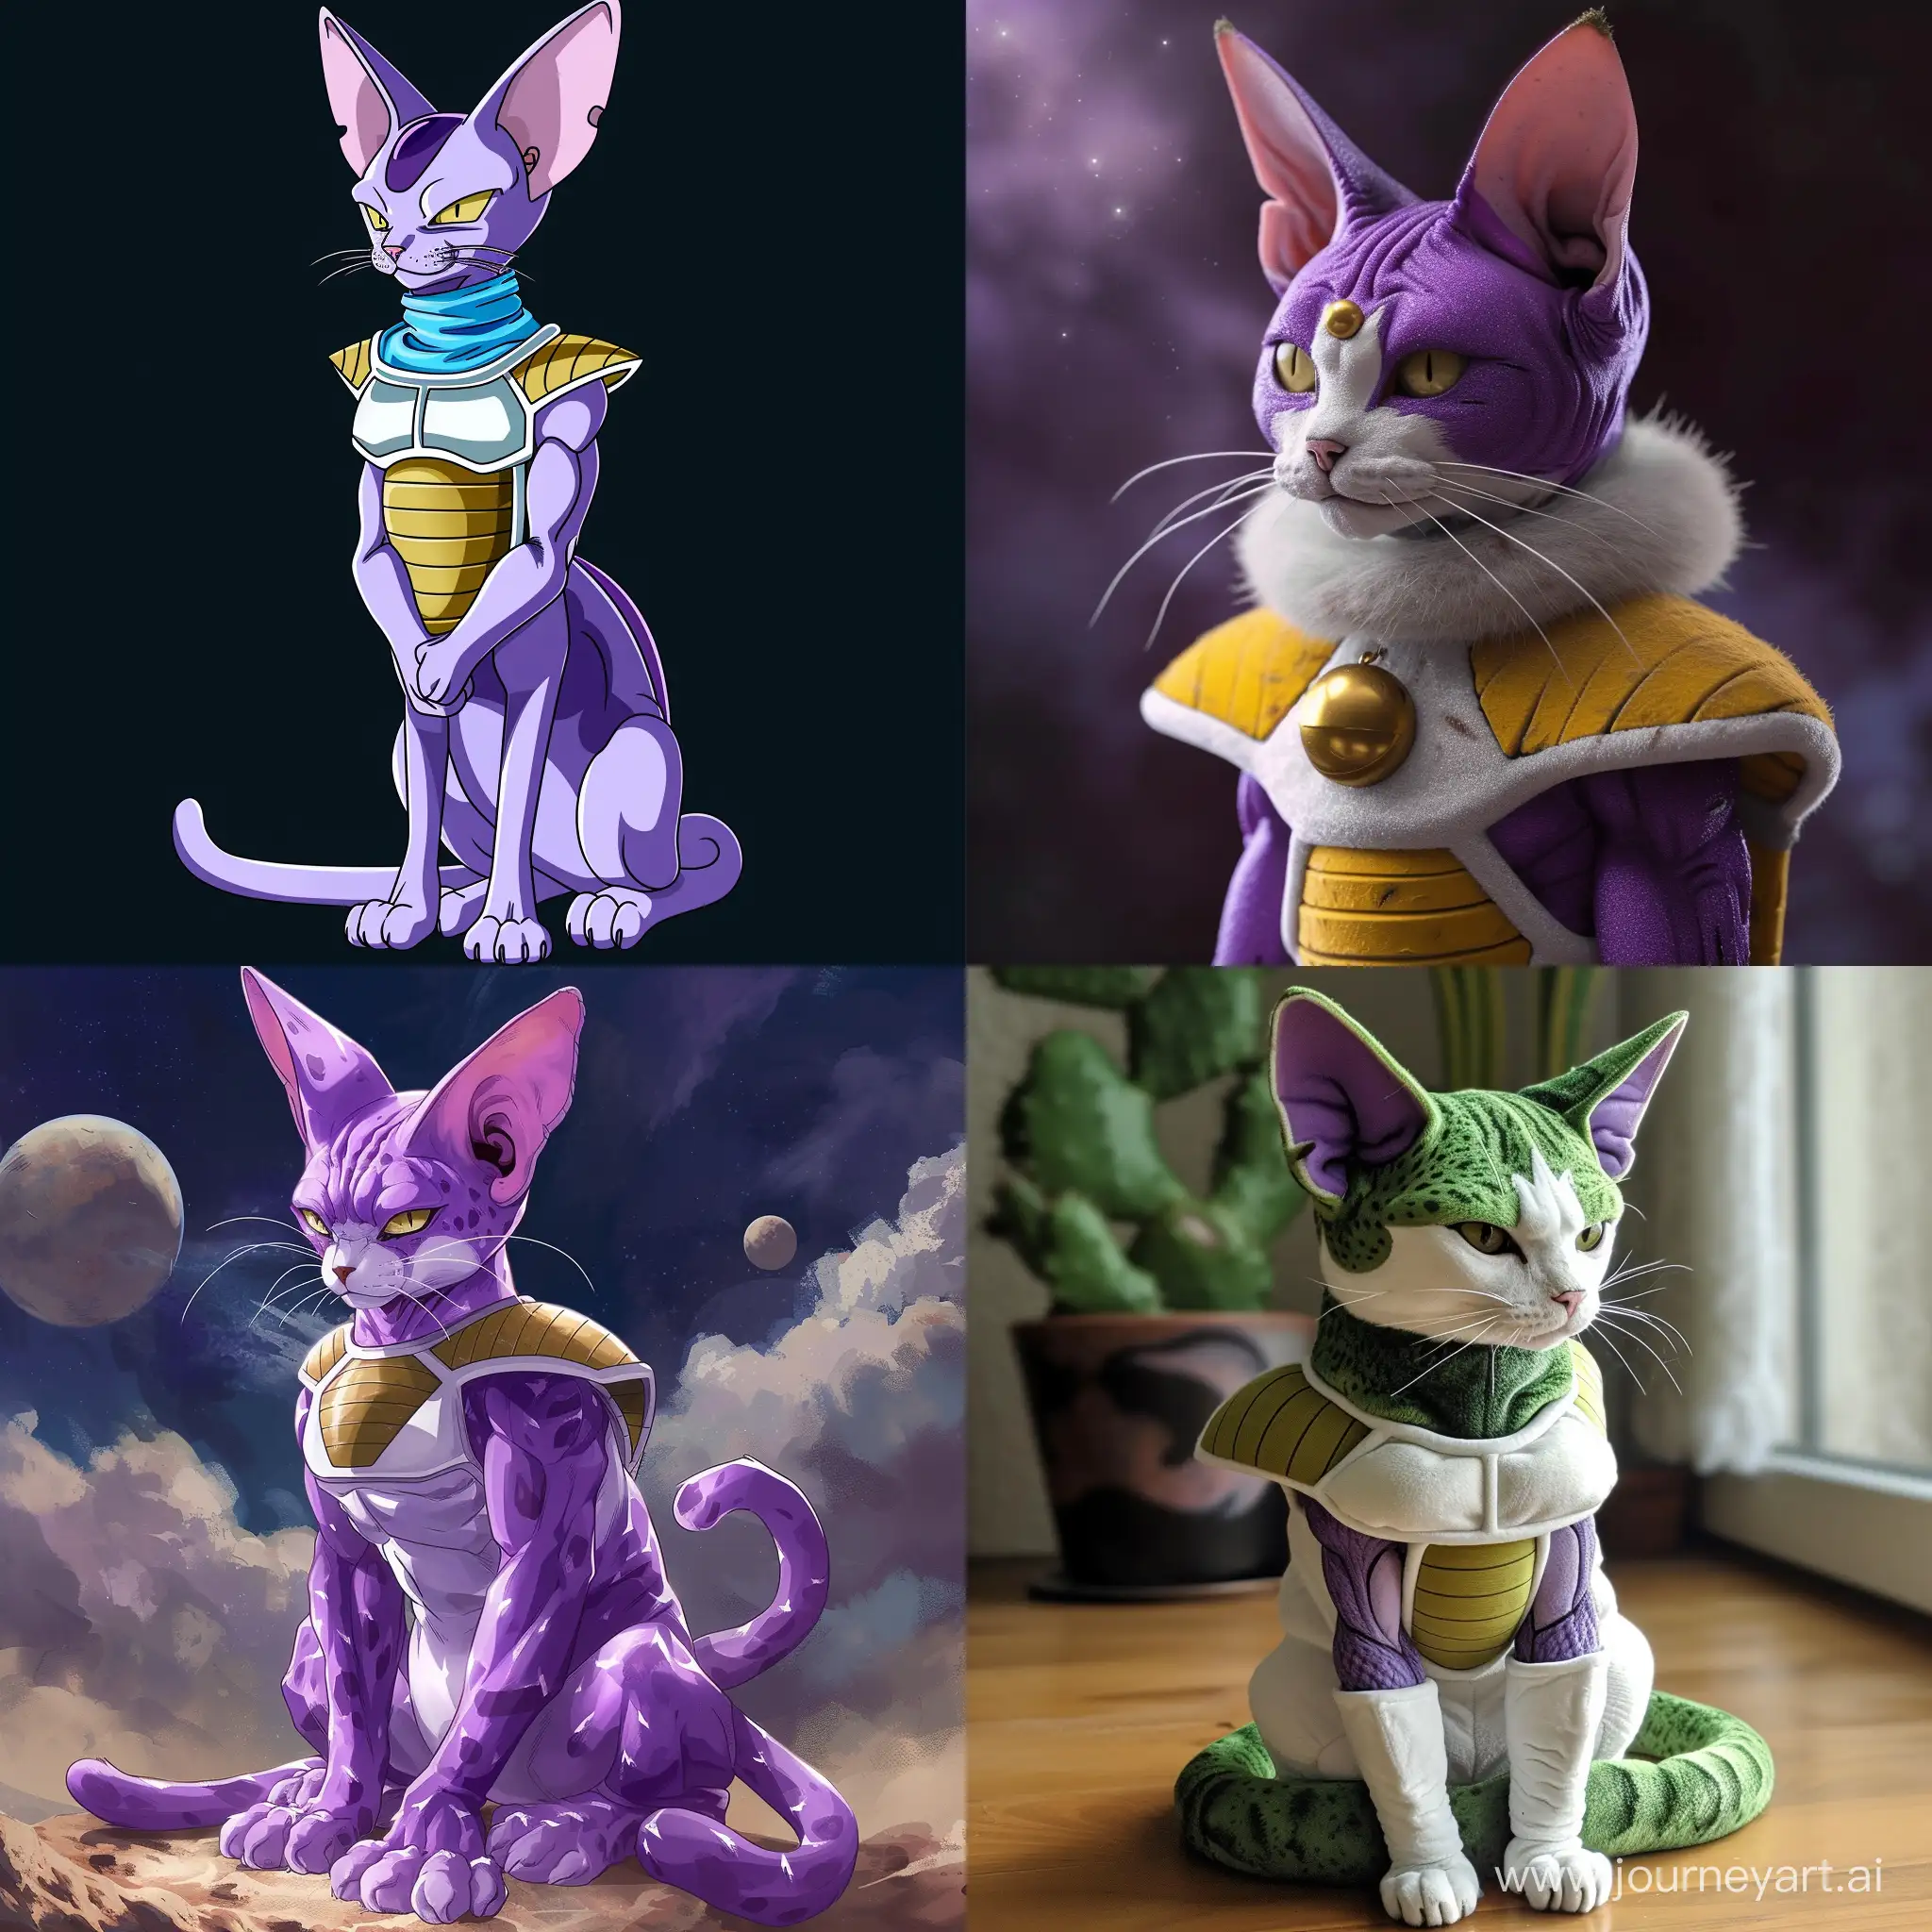  freeza from dbz but it’s a cat